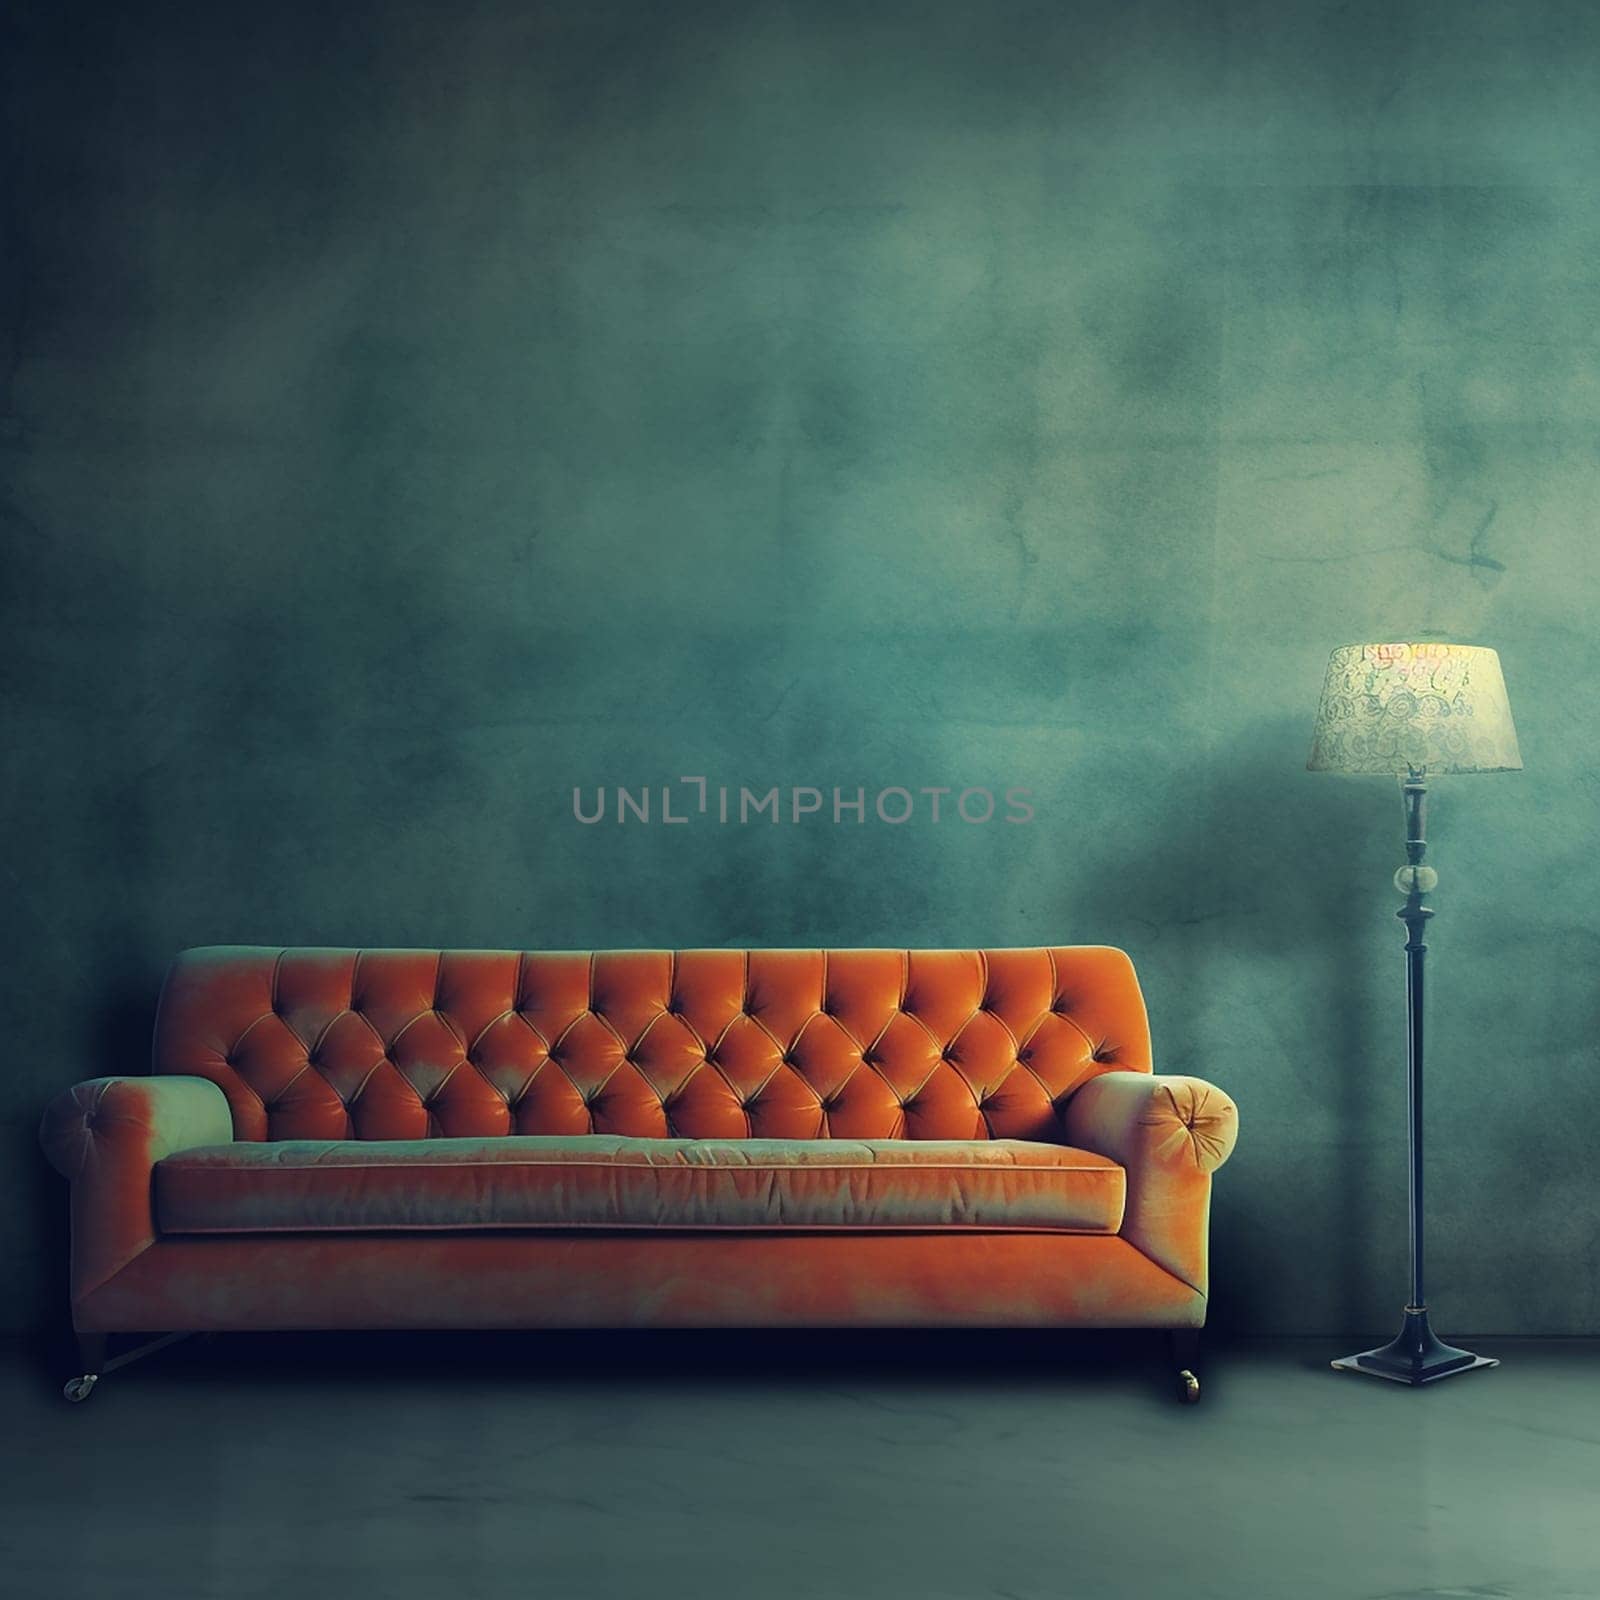 Elegant Orange Sofa in a Chic elegant and modern Living Room, with lamp and green wallpaper or wall